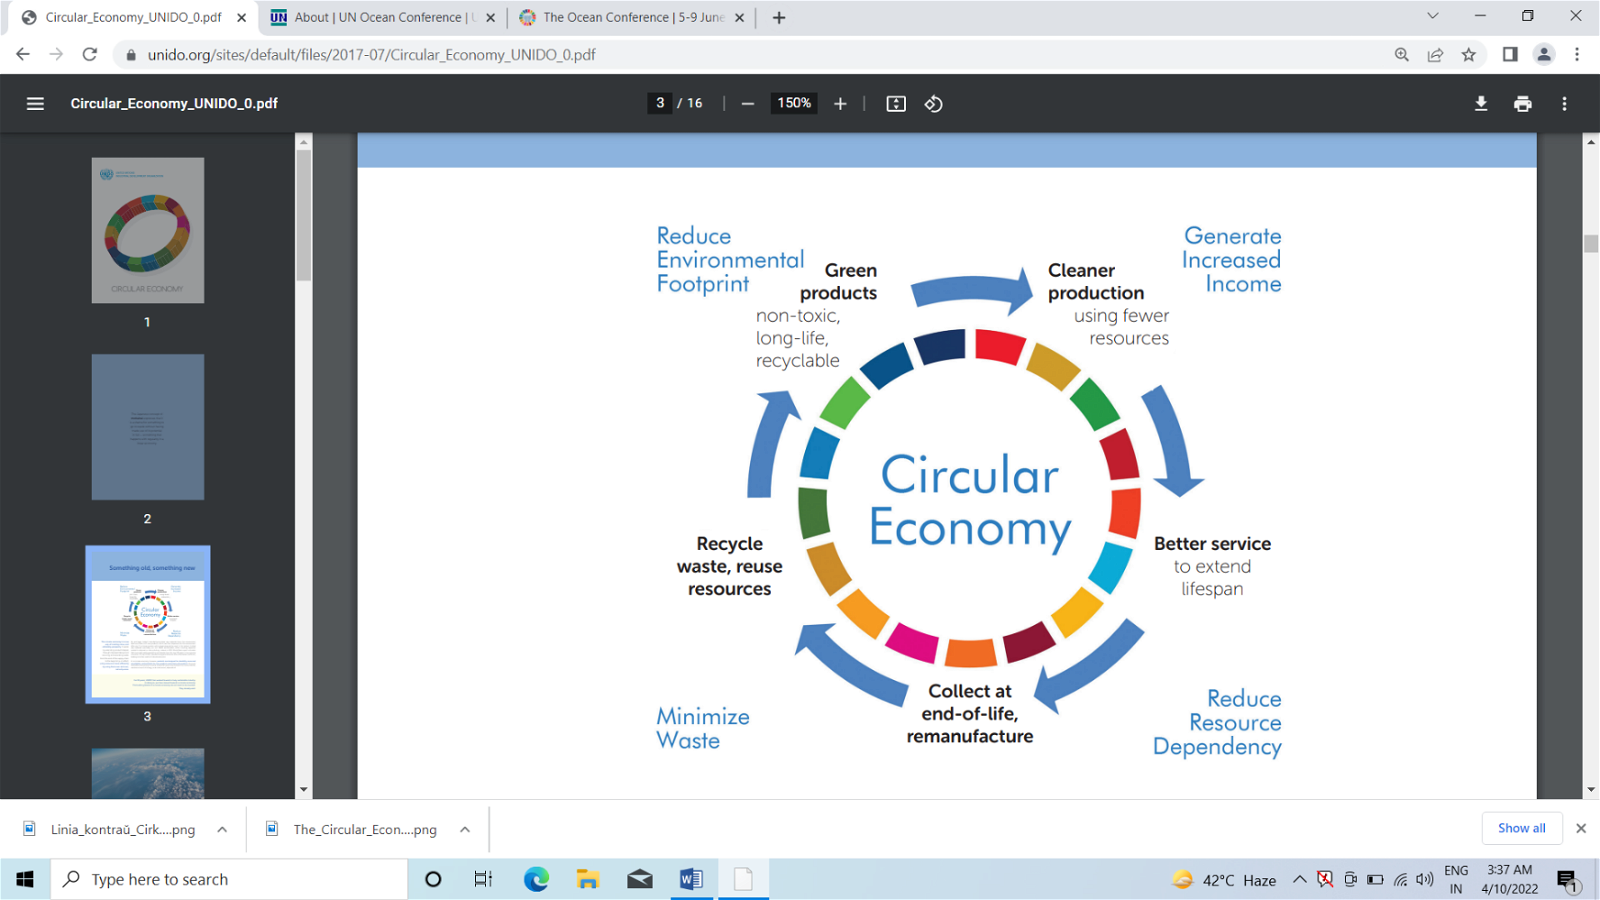 Application of Circular Economy Description automatically generated with low confidence